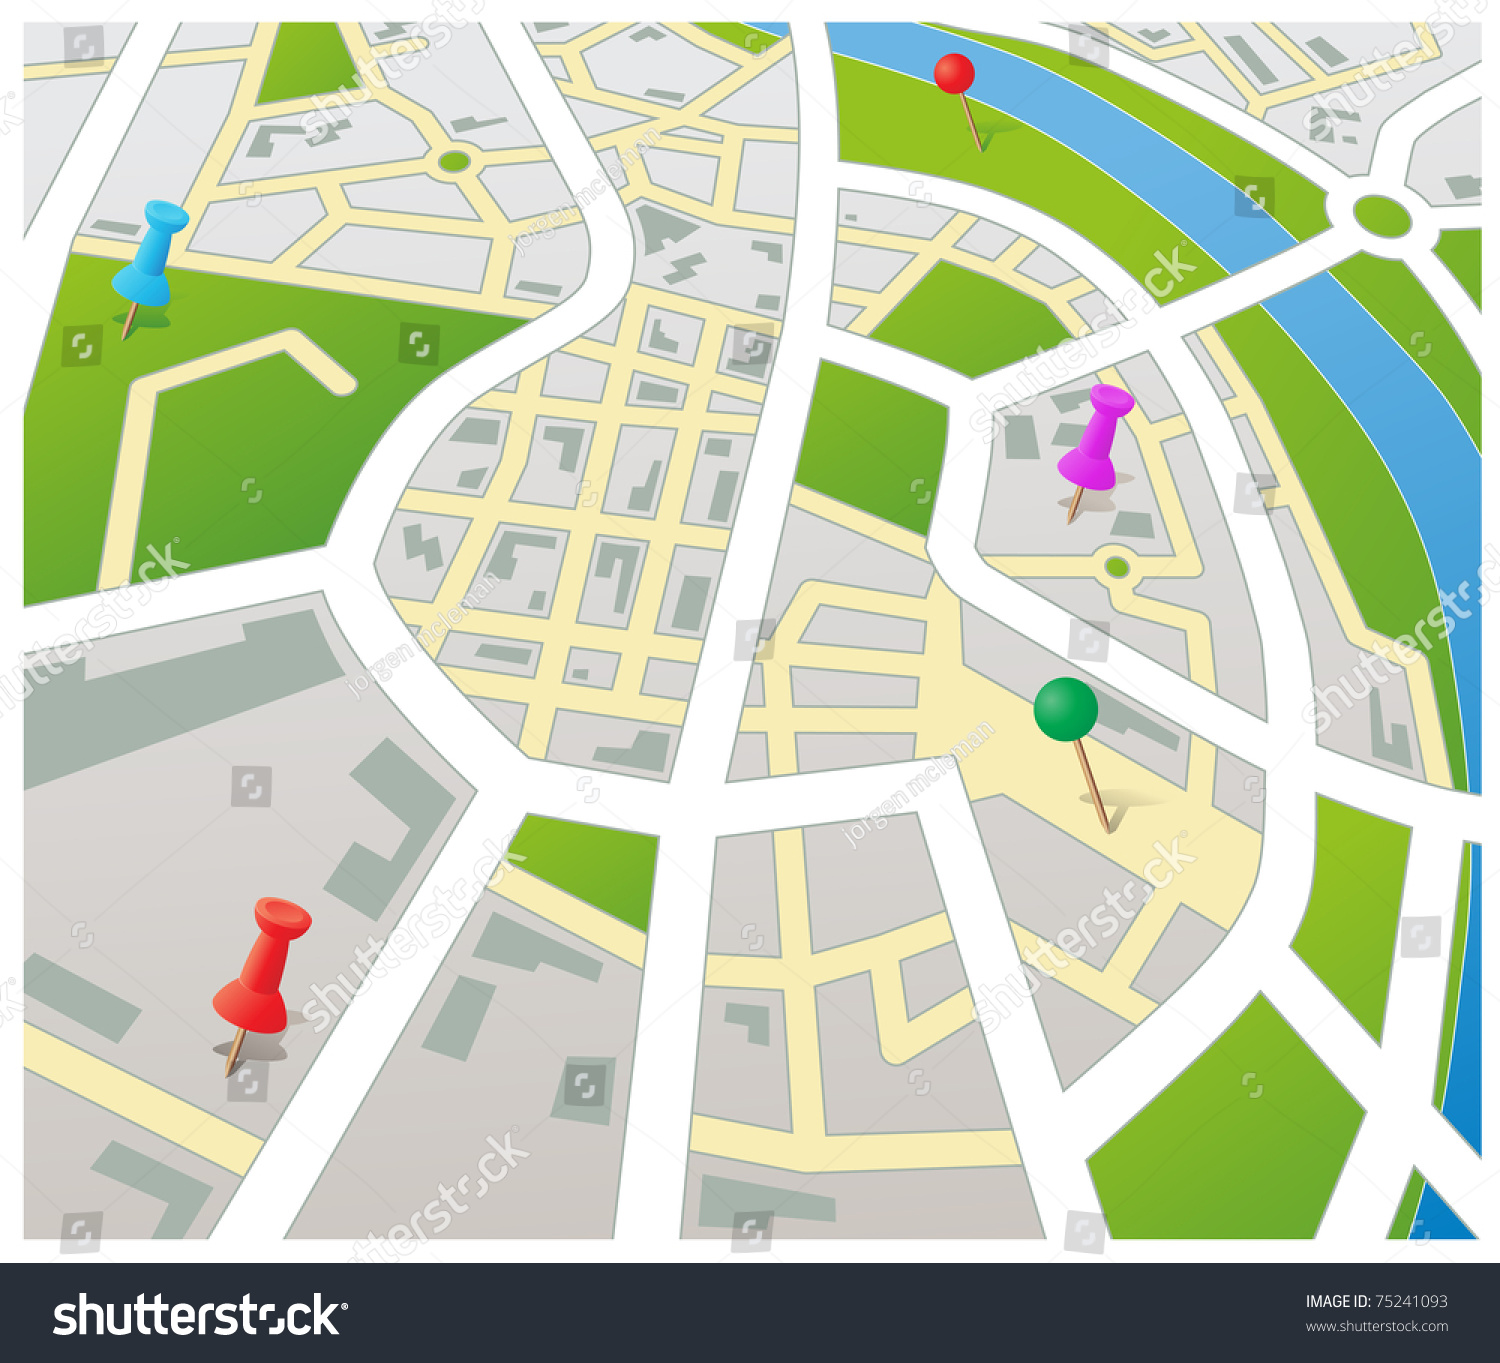 Editable Vector Street Map Of A Generic City With Push Pins - 75241093 ...